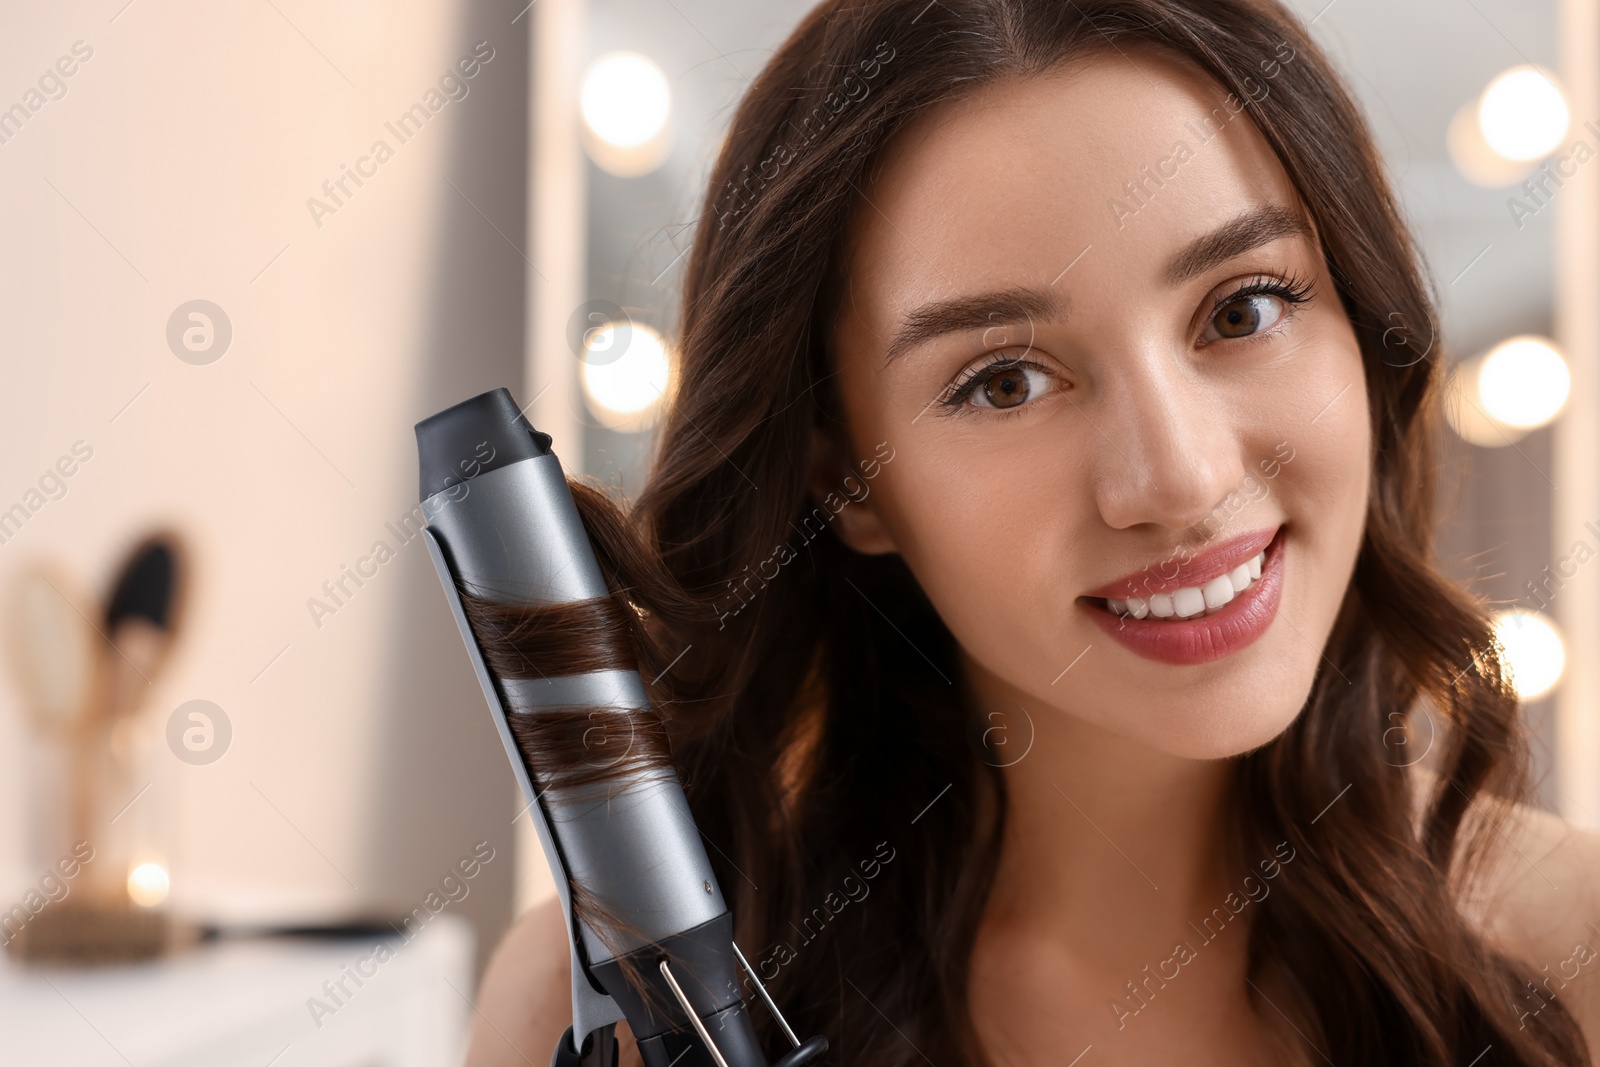 Photo of Smiling woman using curling hair iron indoors